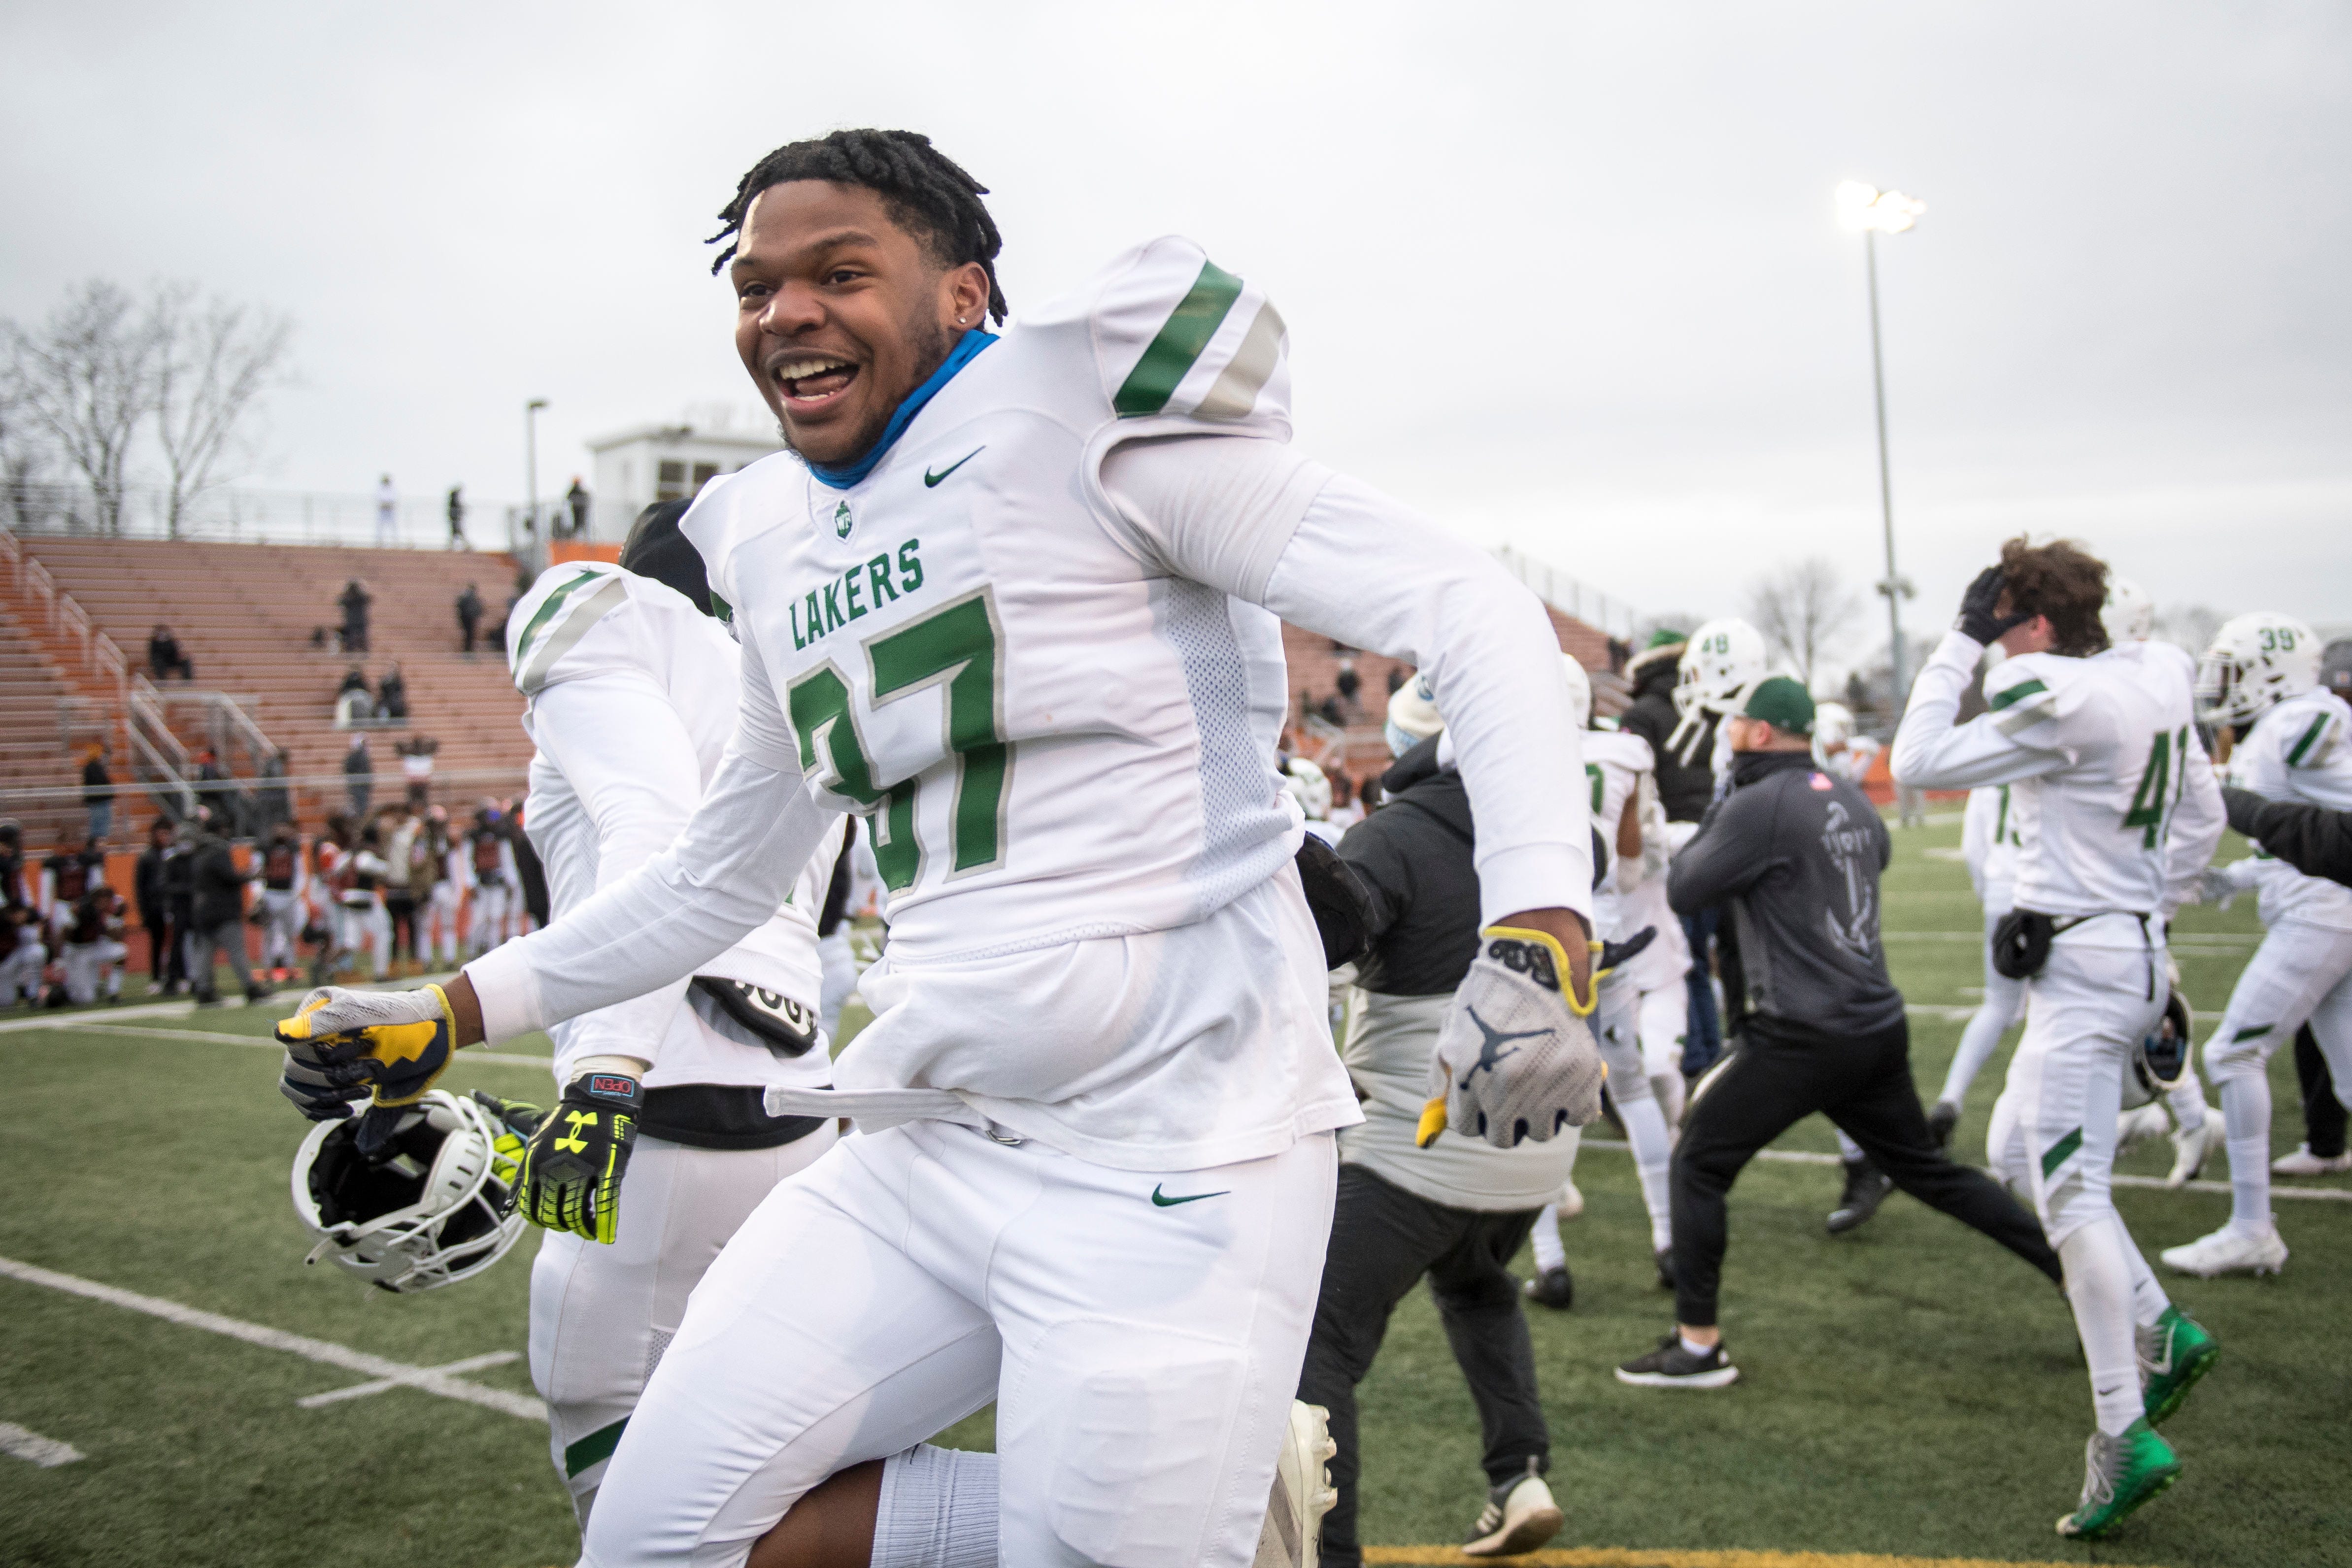 West Bloomfield junior Jaydan Montgomery (37) celebrates after the Lakers defeated Belleville 35-34 in double overtime of a state football semi-final game at Belleville on Saturday,  Jan. 16, 2021.